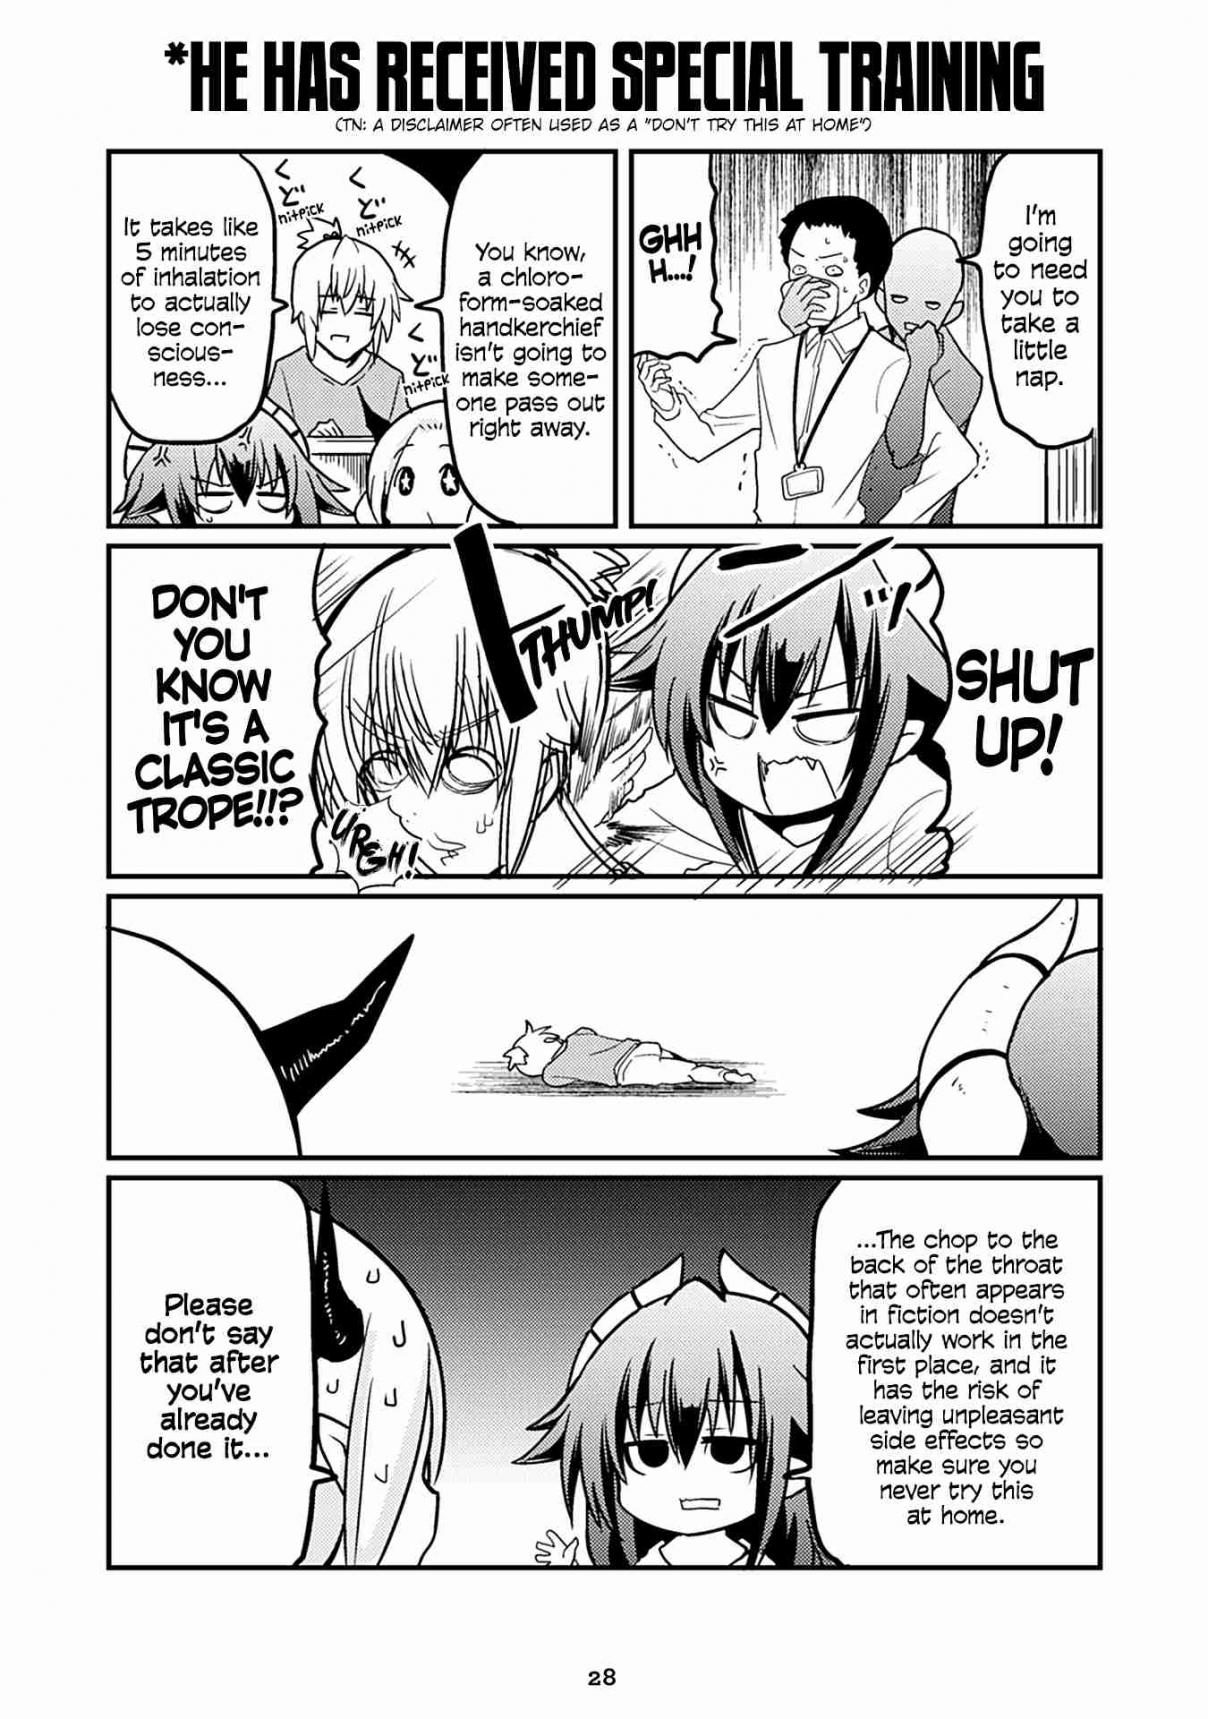 Naughty Succubus "Saki chan" Vol. 2 Ch. 120 He has received special training